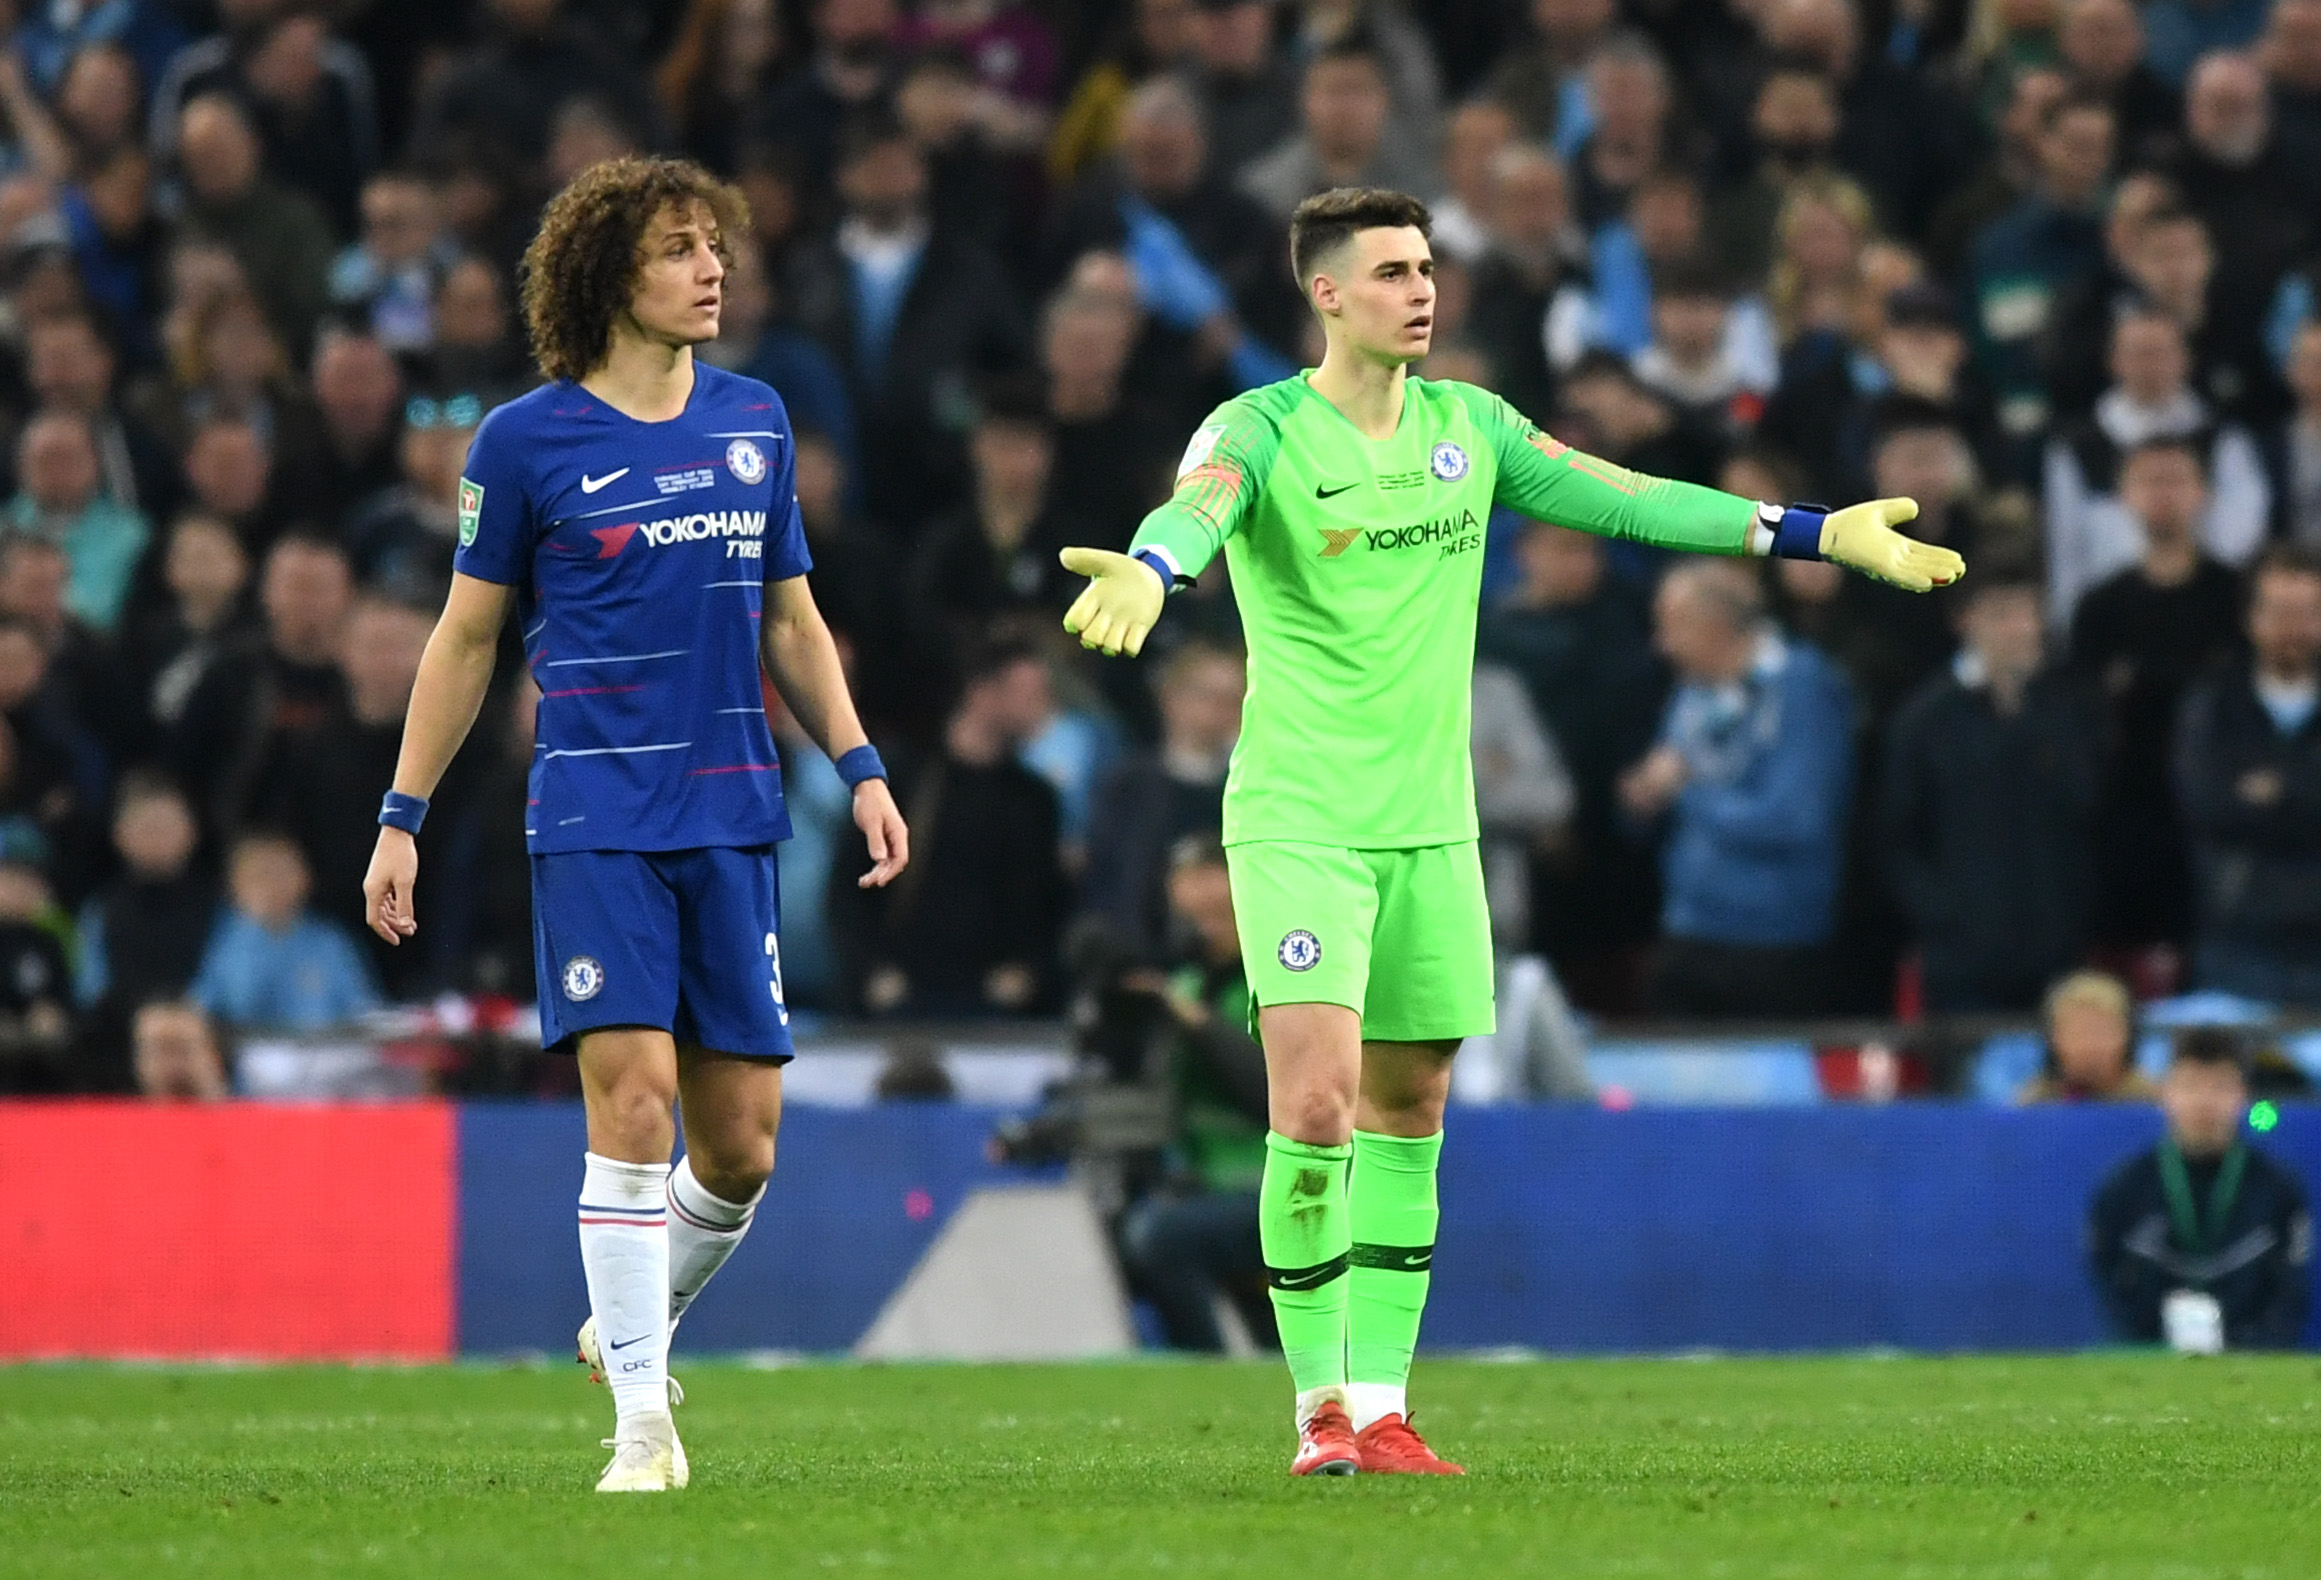 Kepa Arrizabalaga refuses to be substituted in last Sunday’s Carabao Cup Final